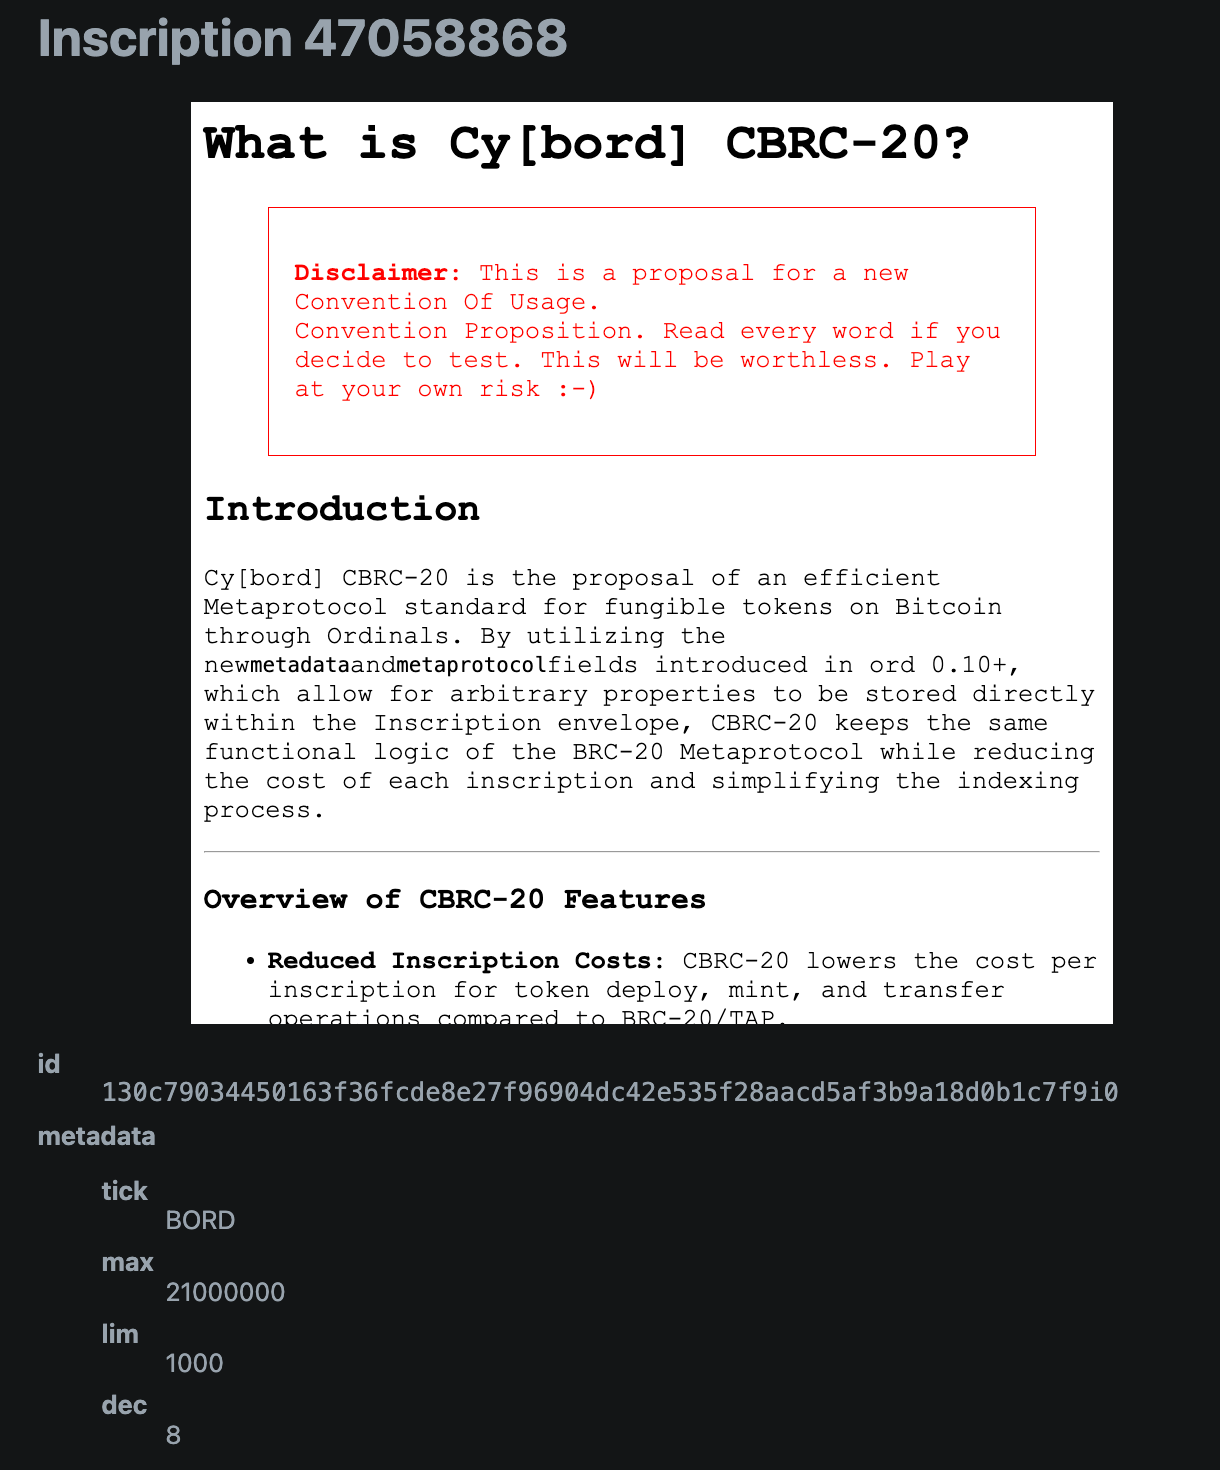 What is CBRC-20?